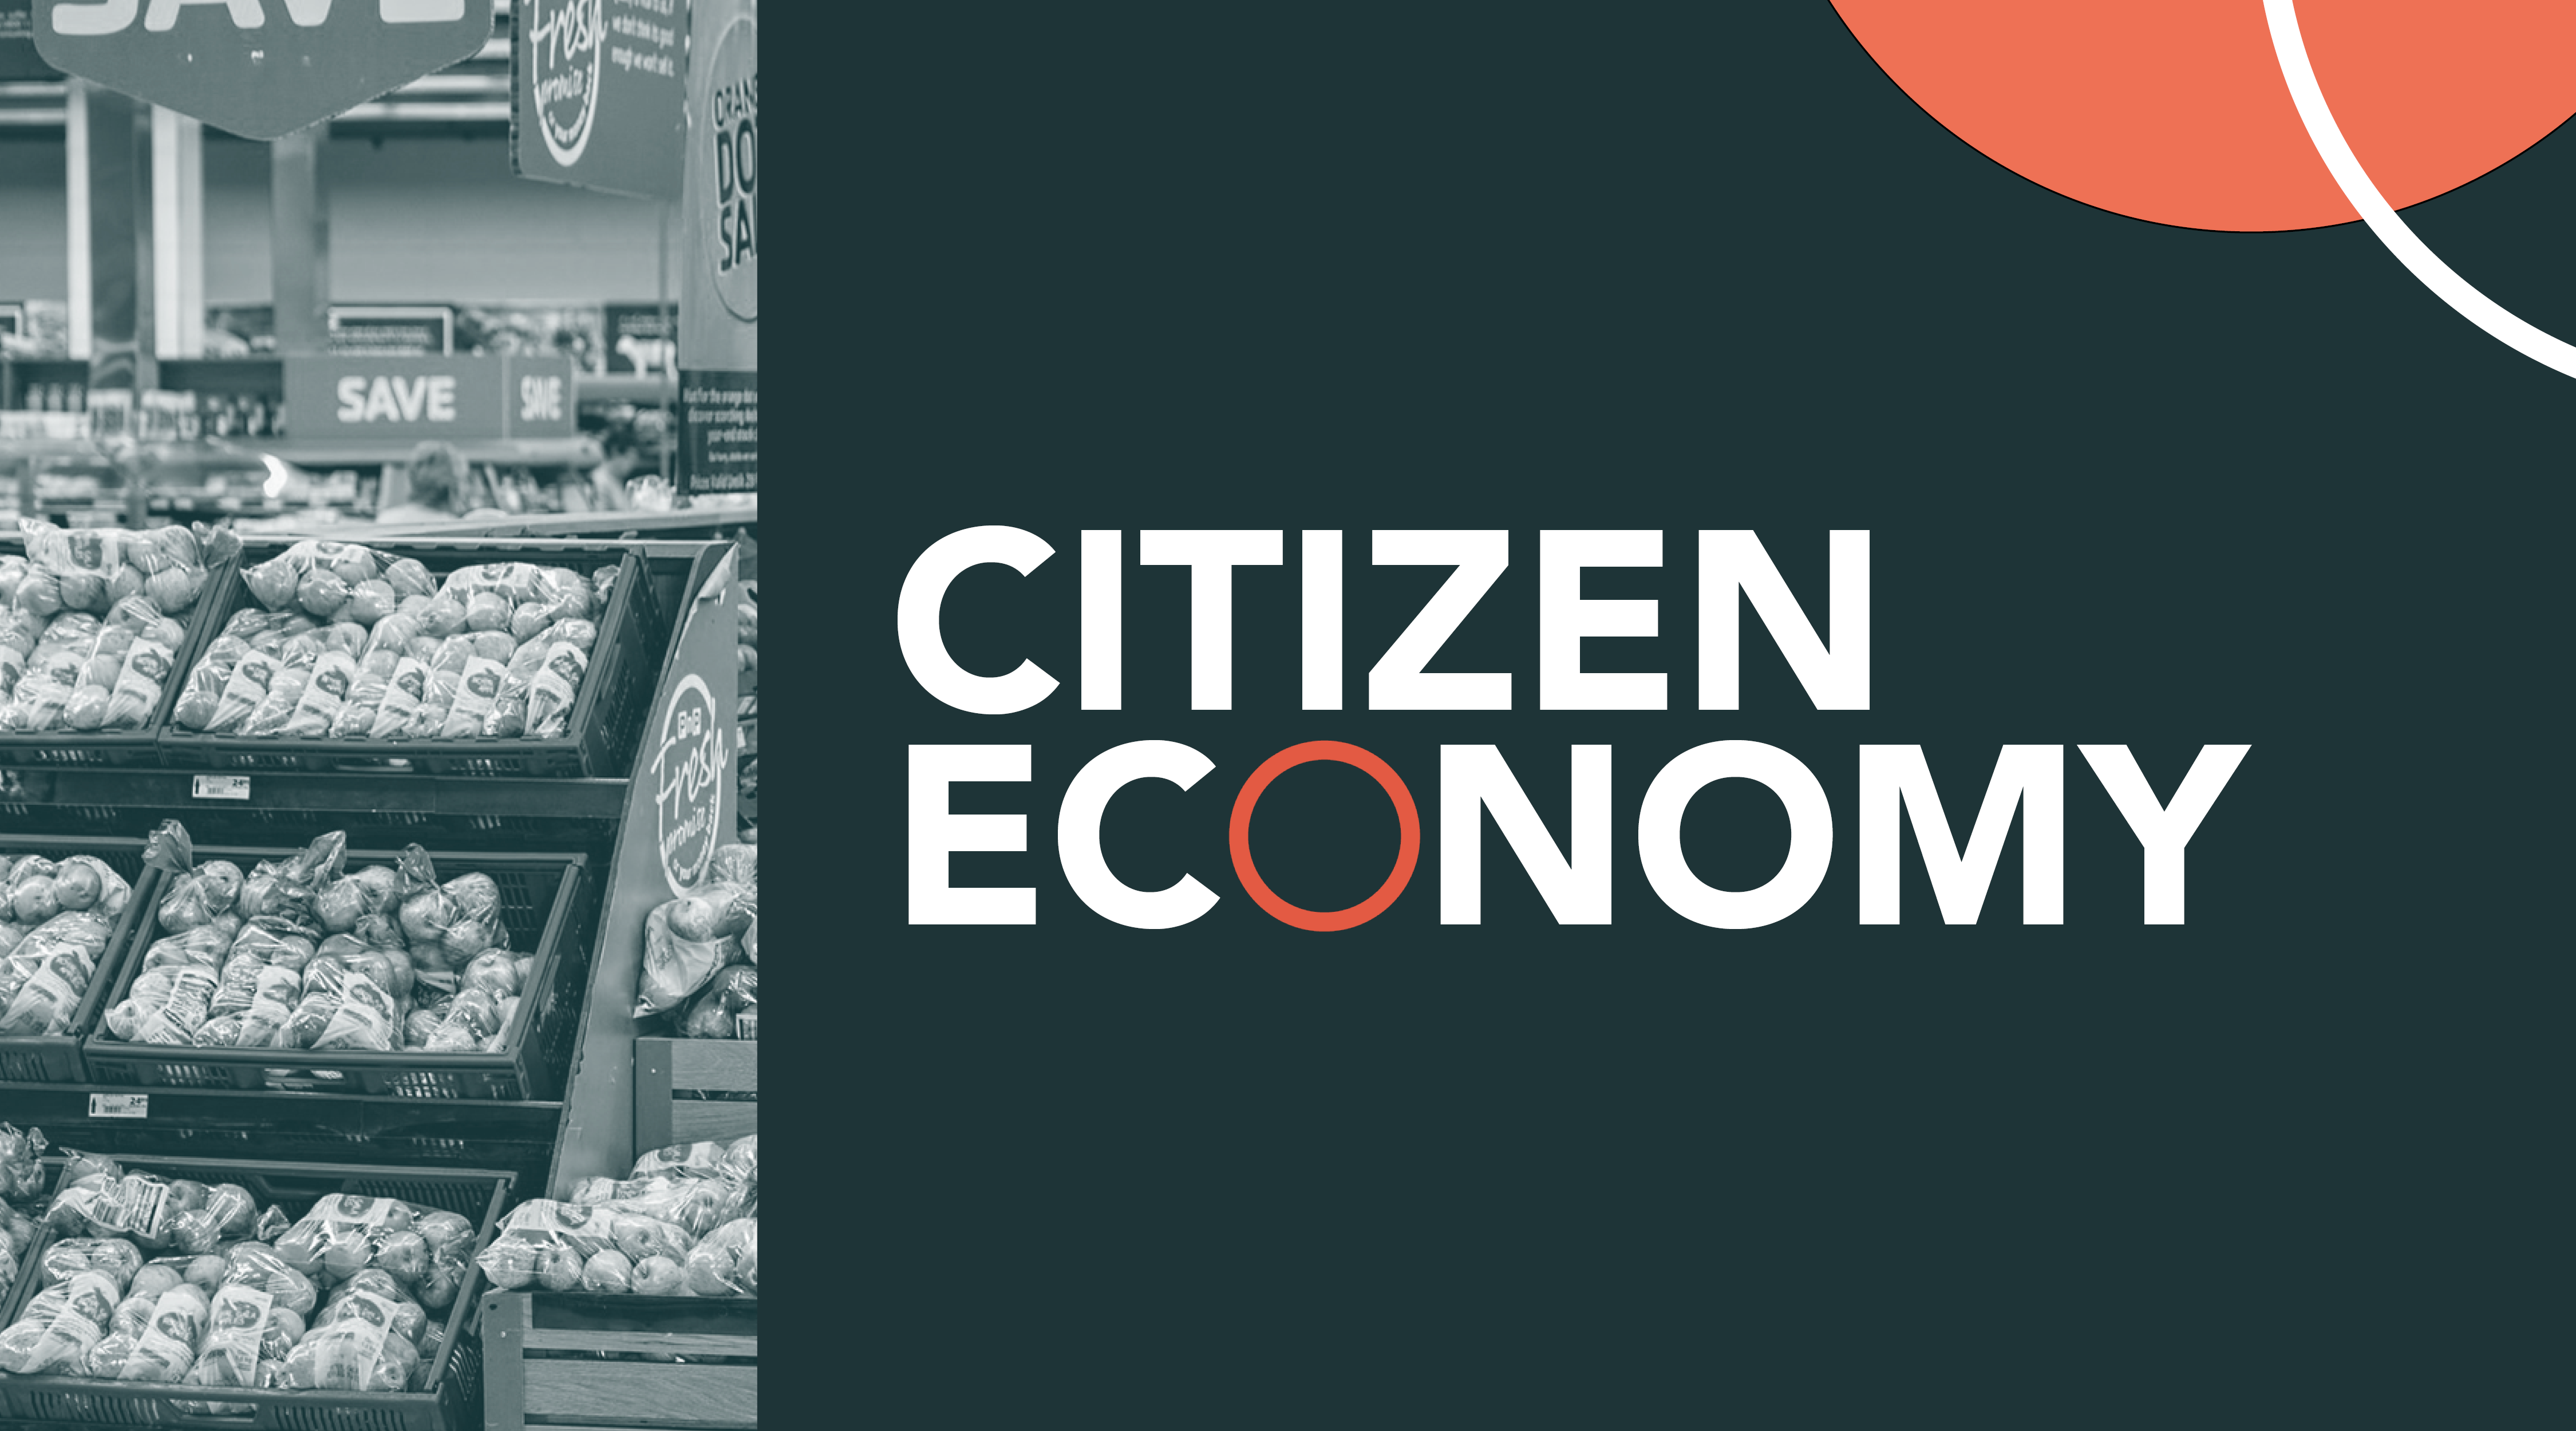 A Citizen Economy, where people, businesses, charities and government work together to achieve good growth